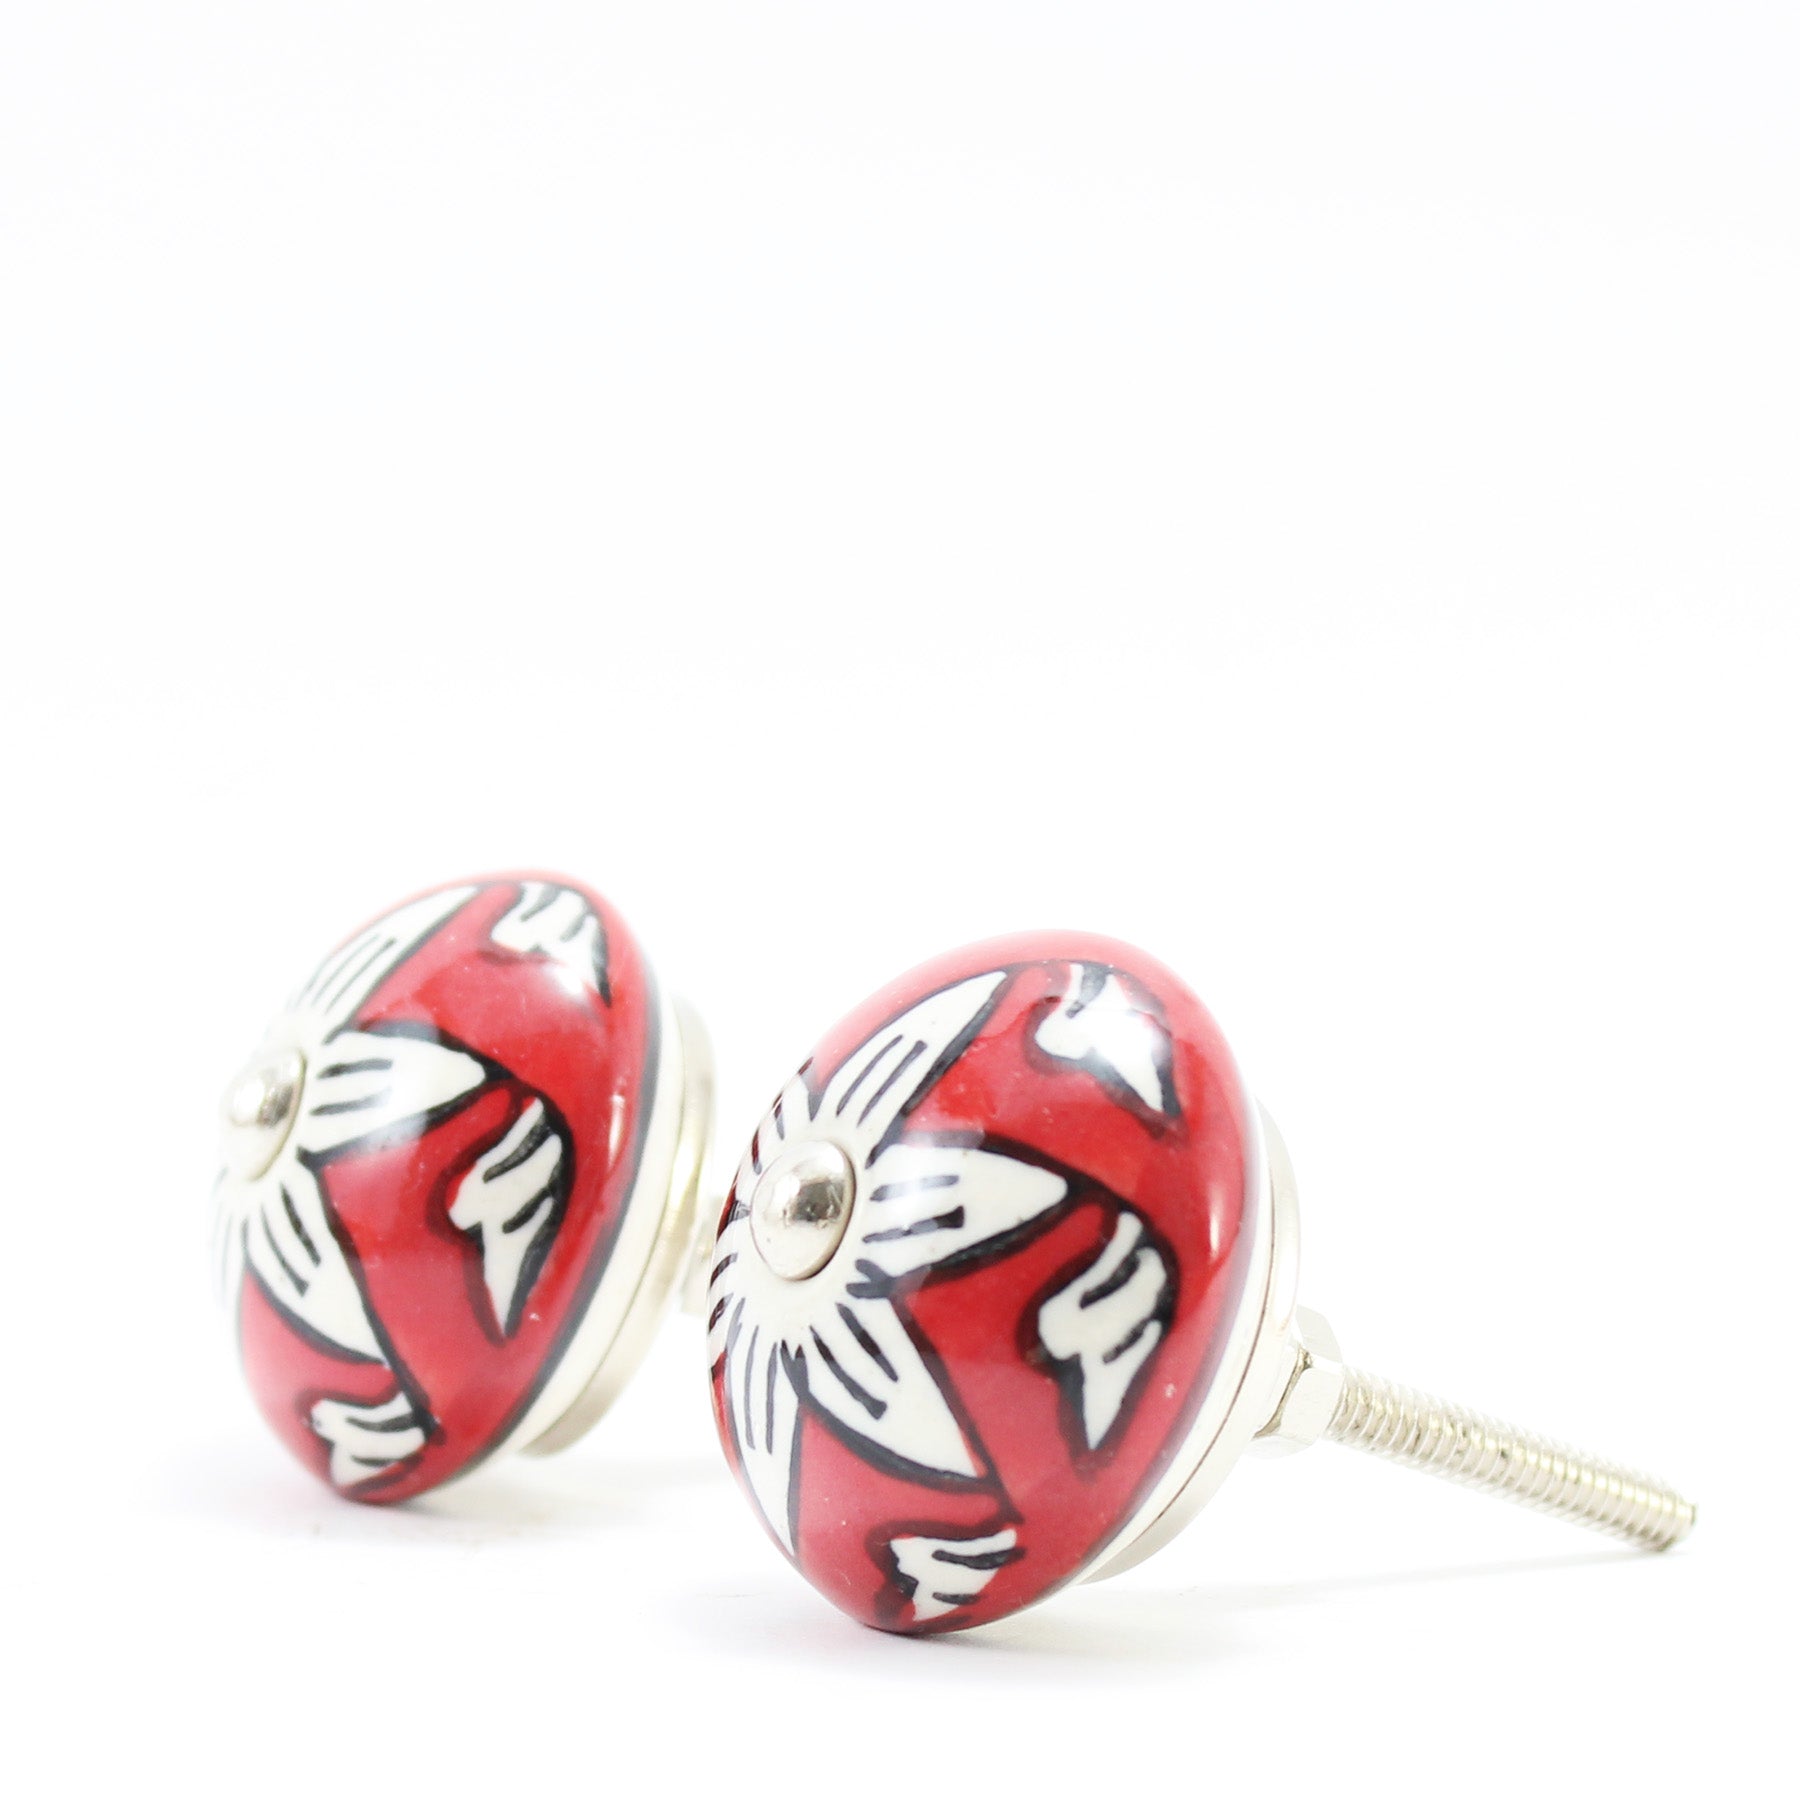 Hand Painted Ceramic Knobs XIII